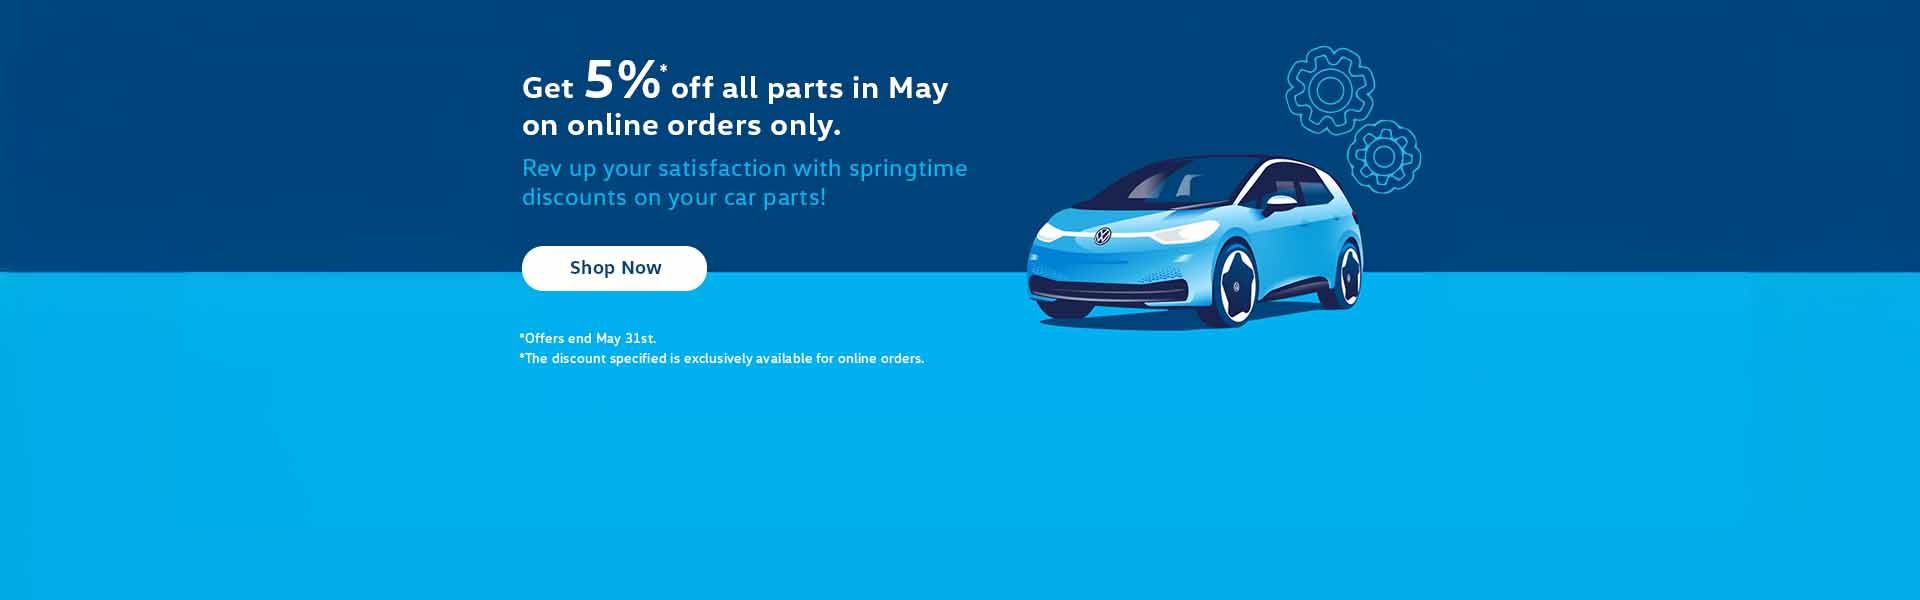 Get 5%* off all parts in May on online orders only.